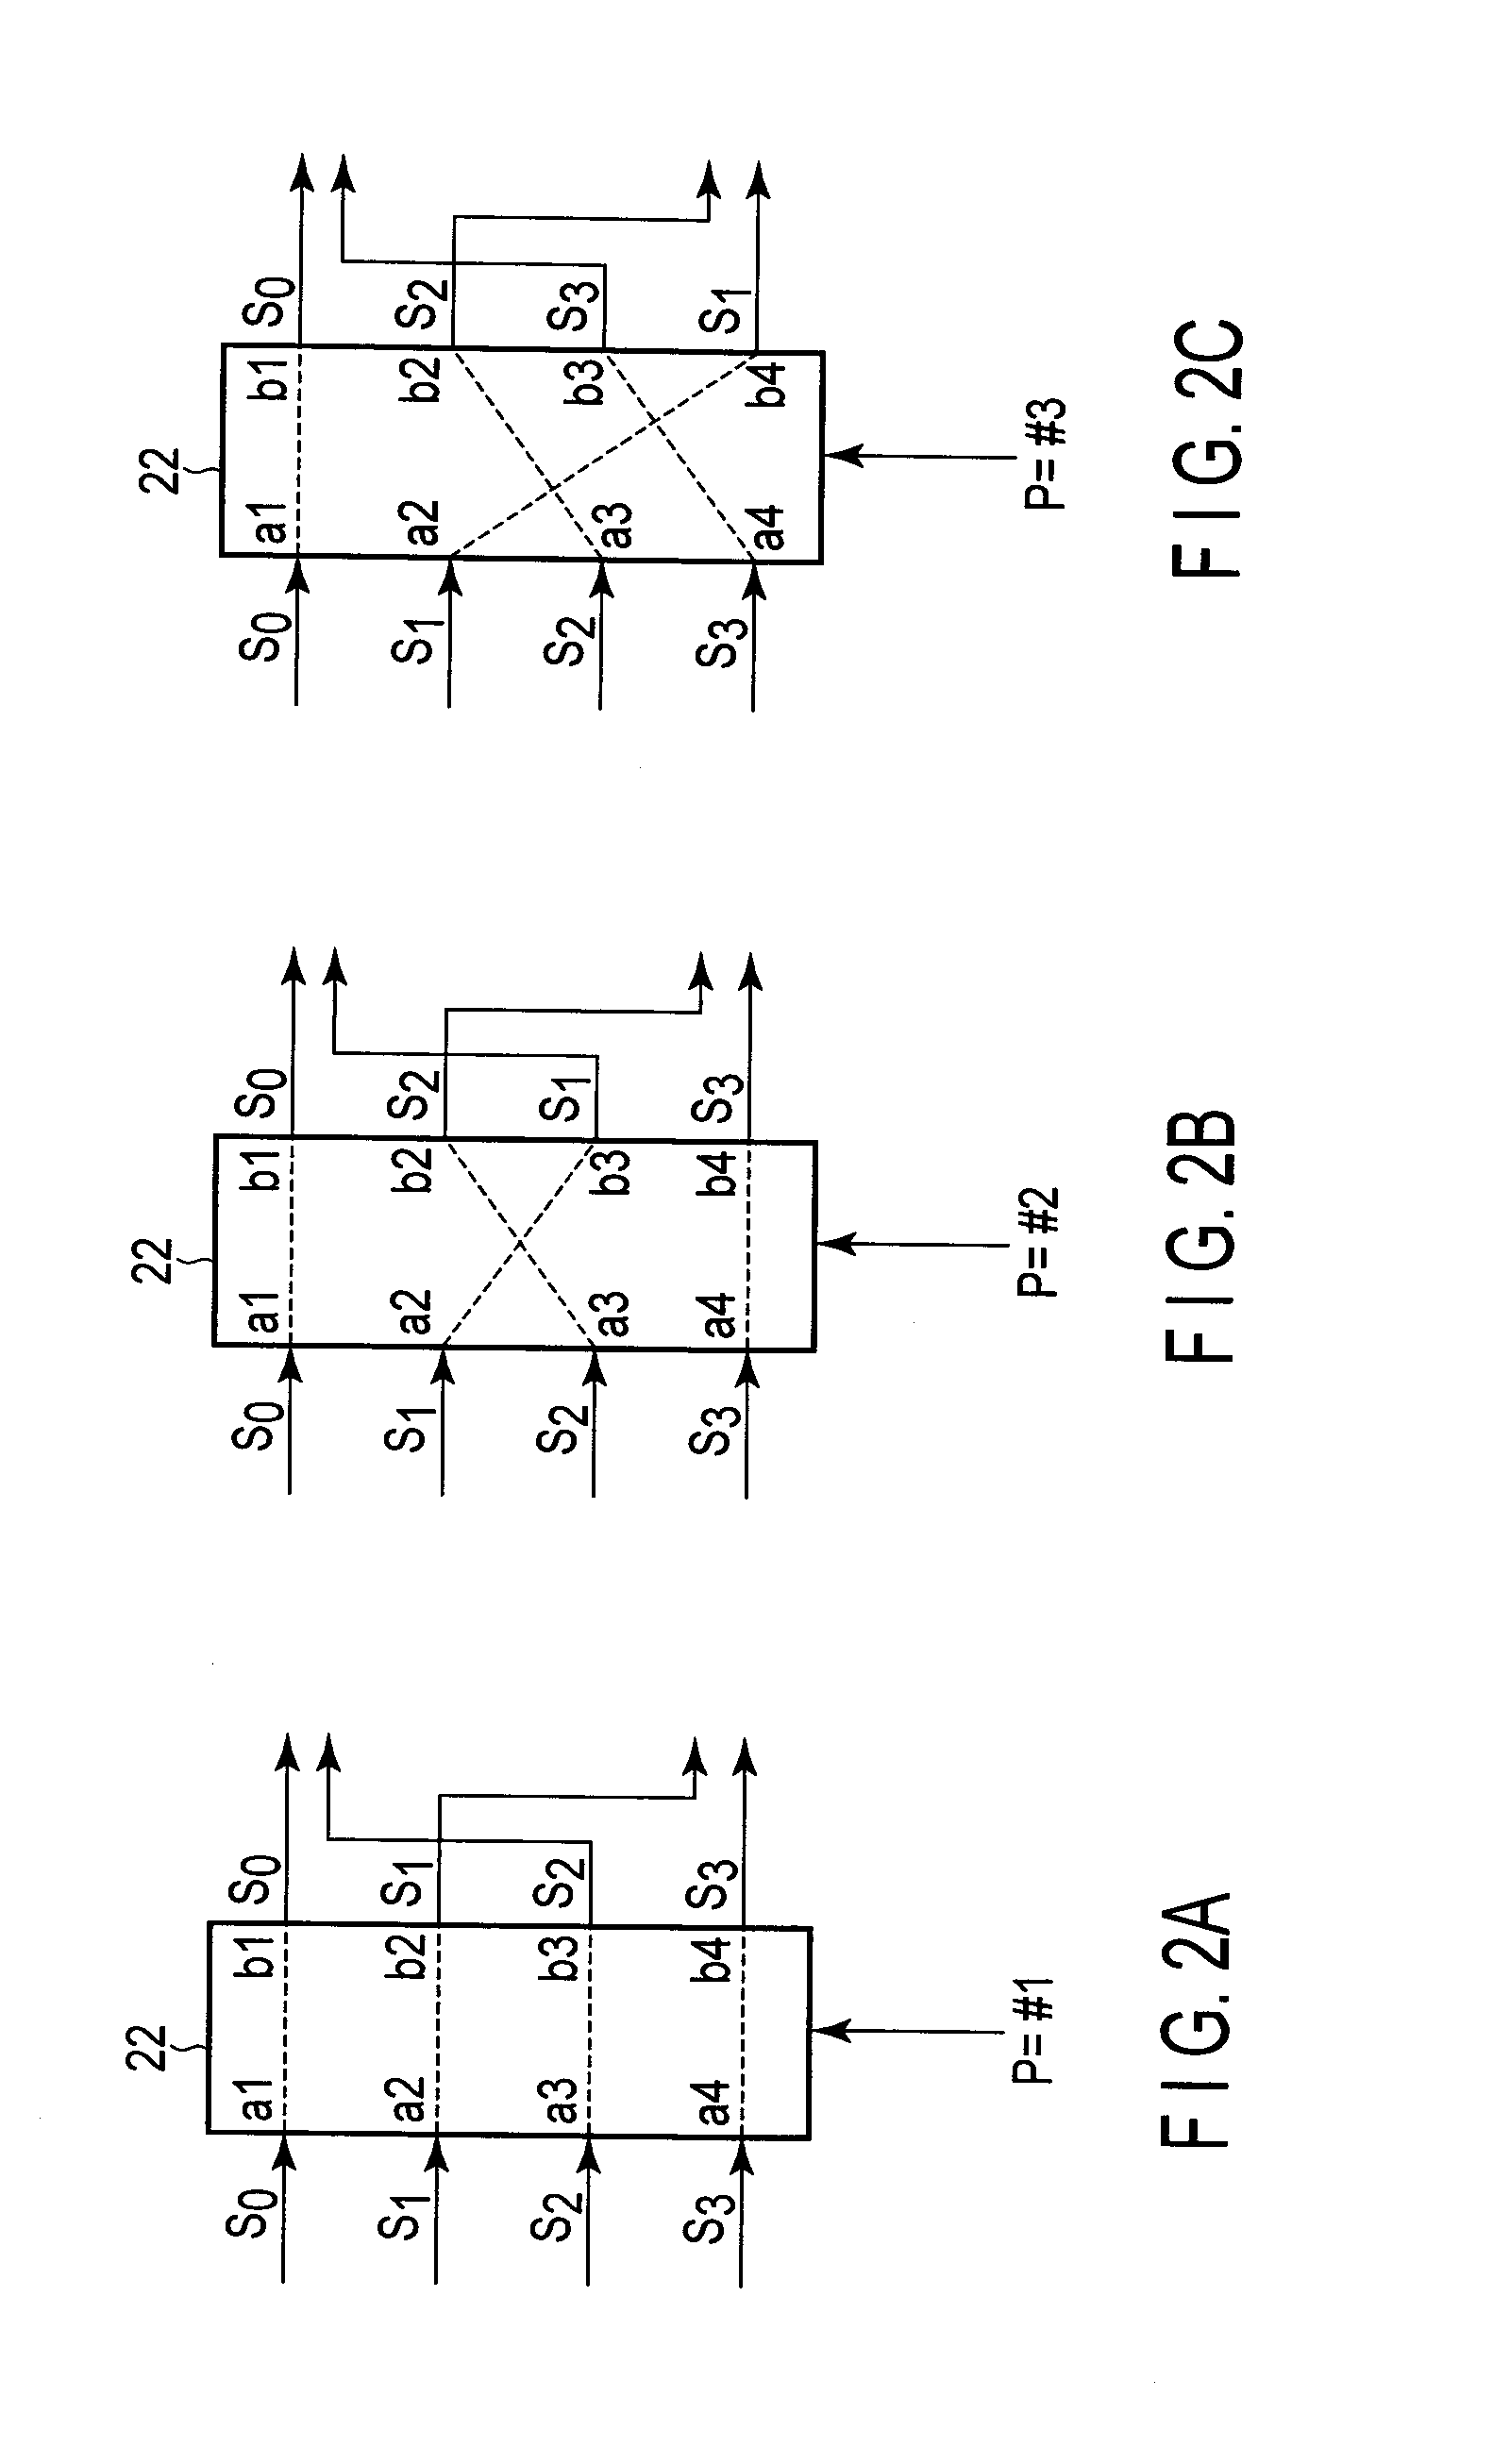 Testing apparatus and method for MIMO systems